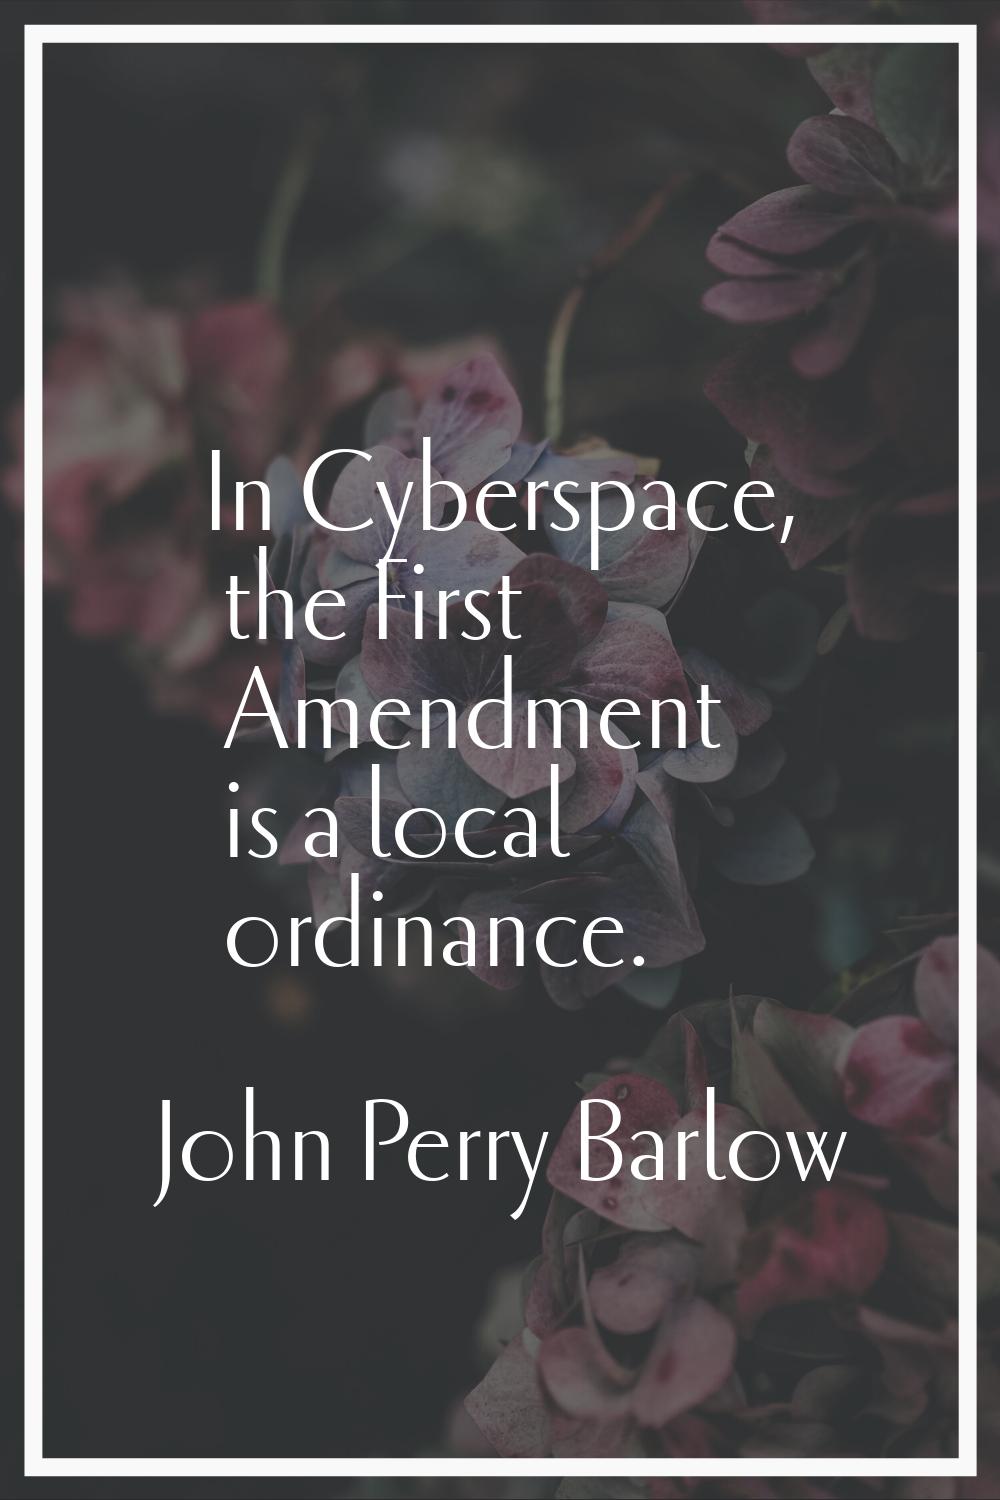 In Cyberspace, the First Amendment is a local ordinance.